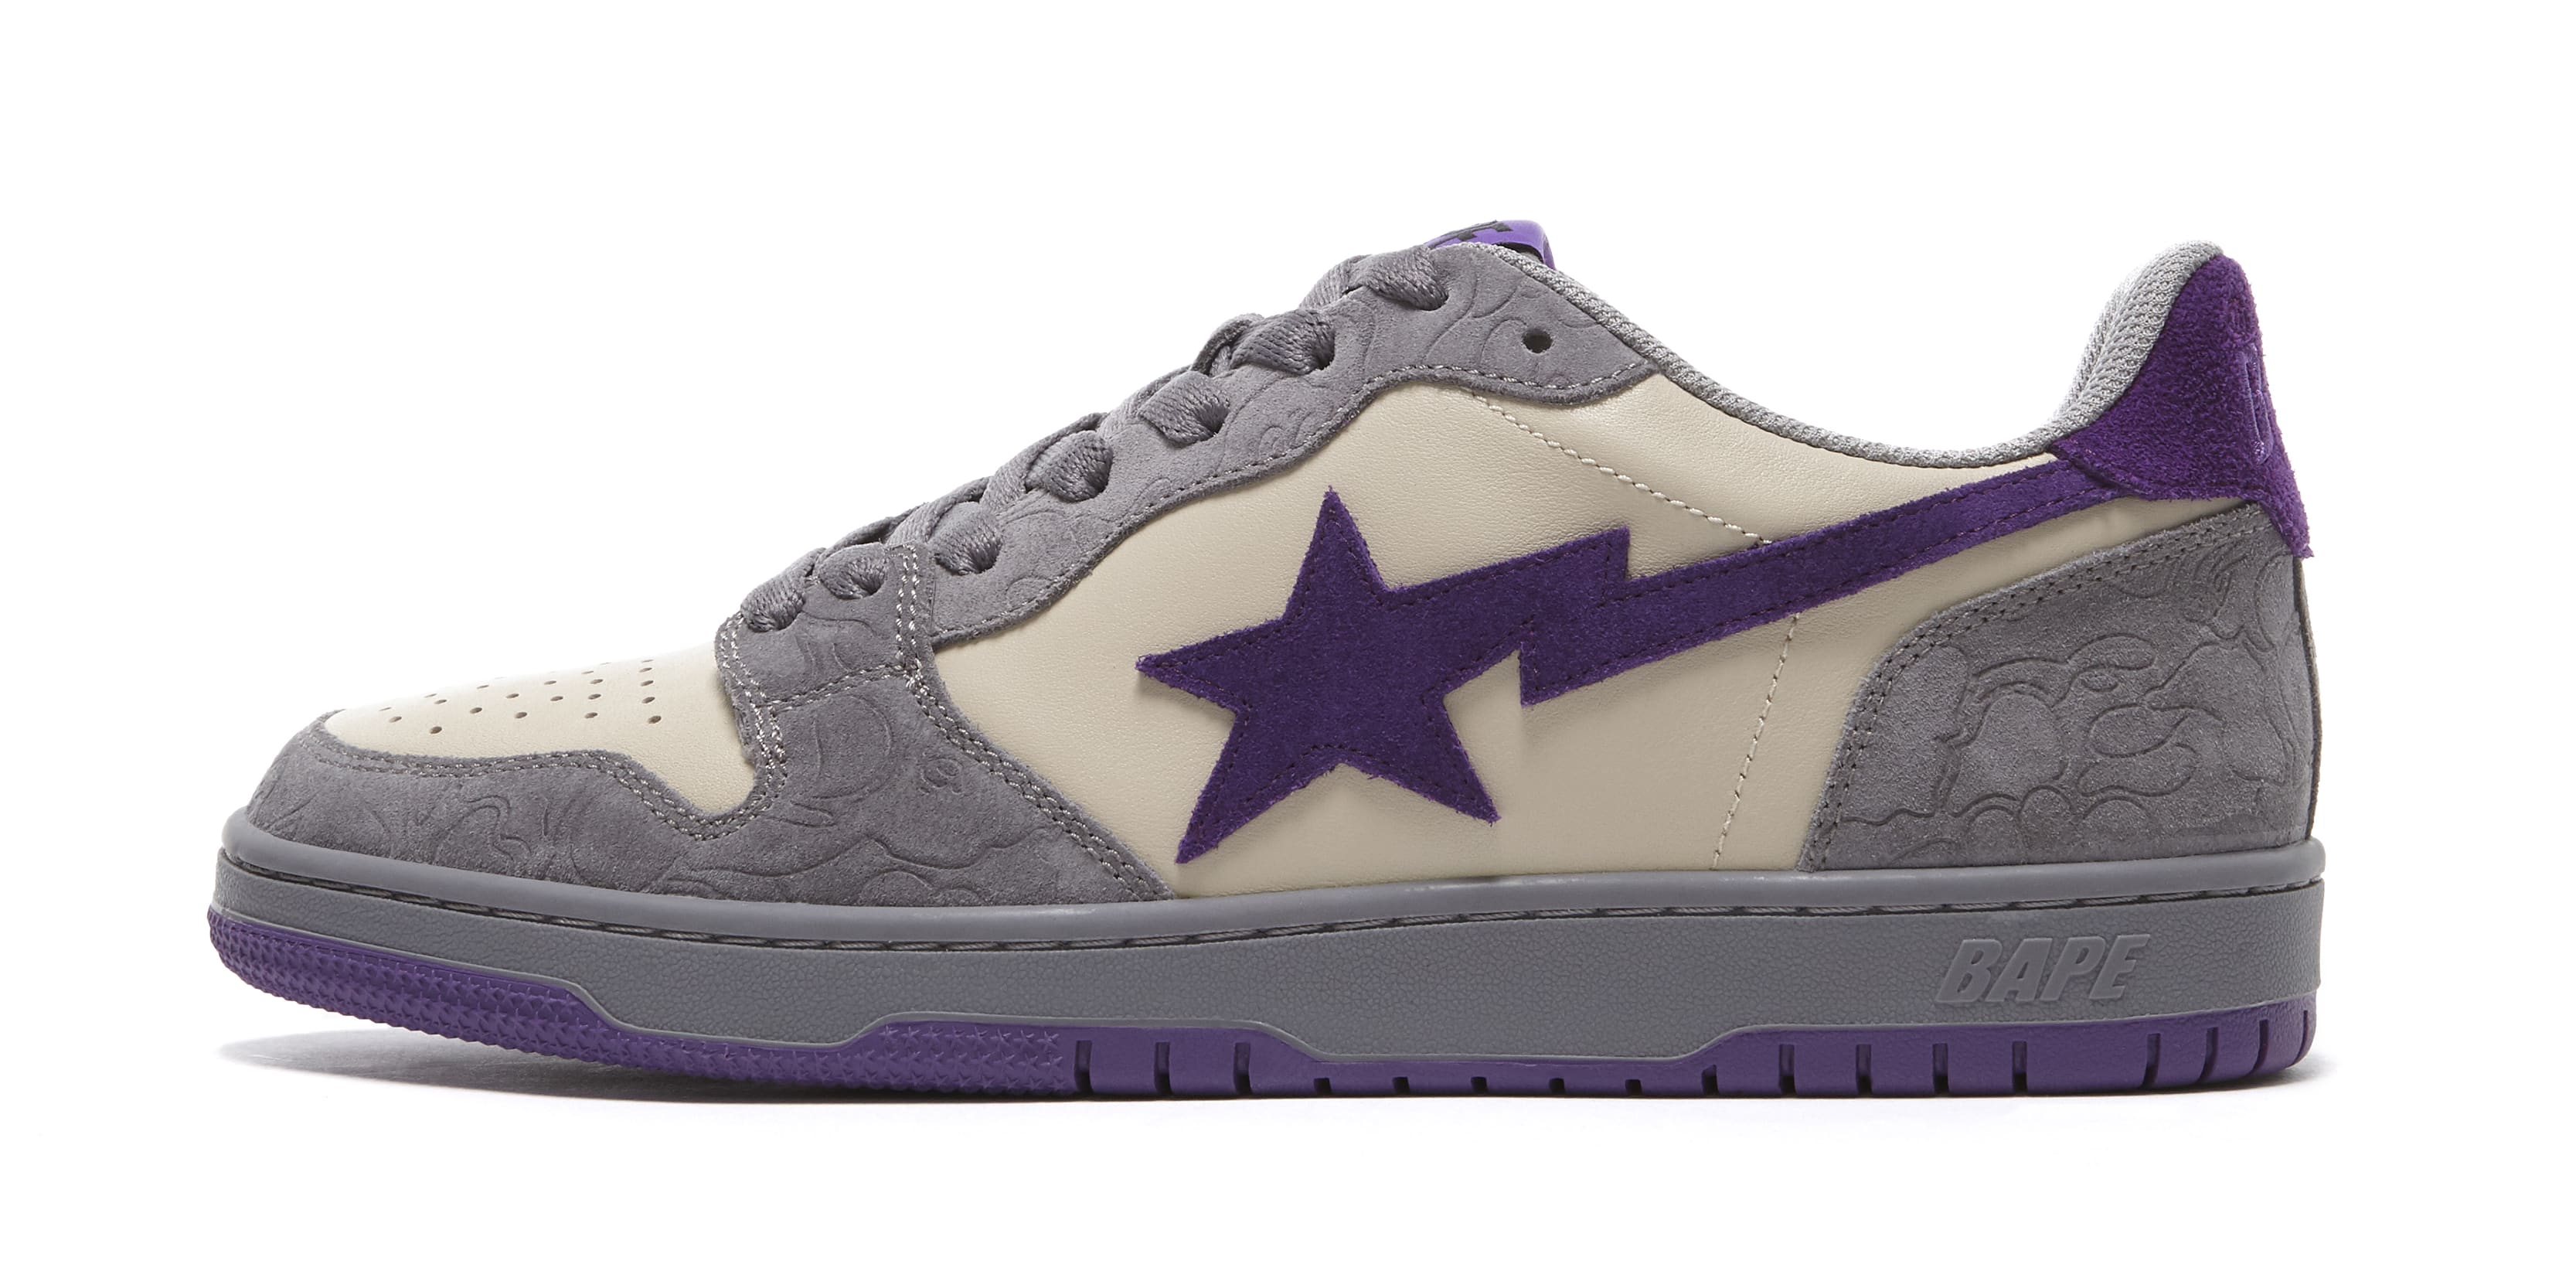 Bape Court Sta Mist Grey and Royal Purple Lateral